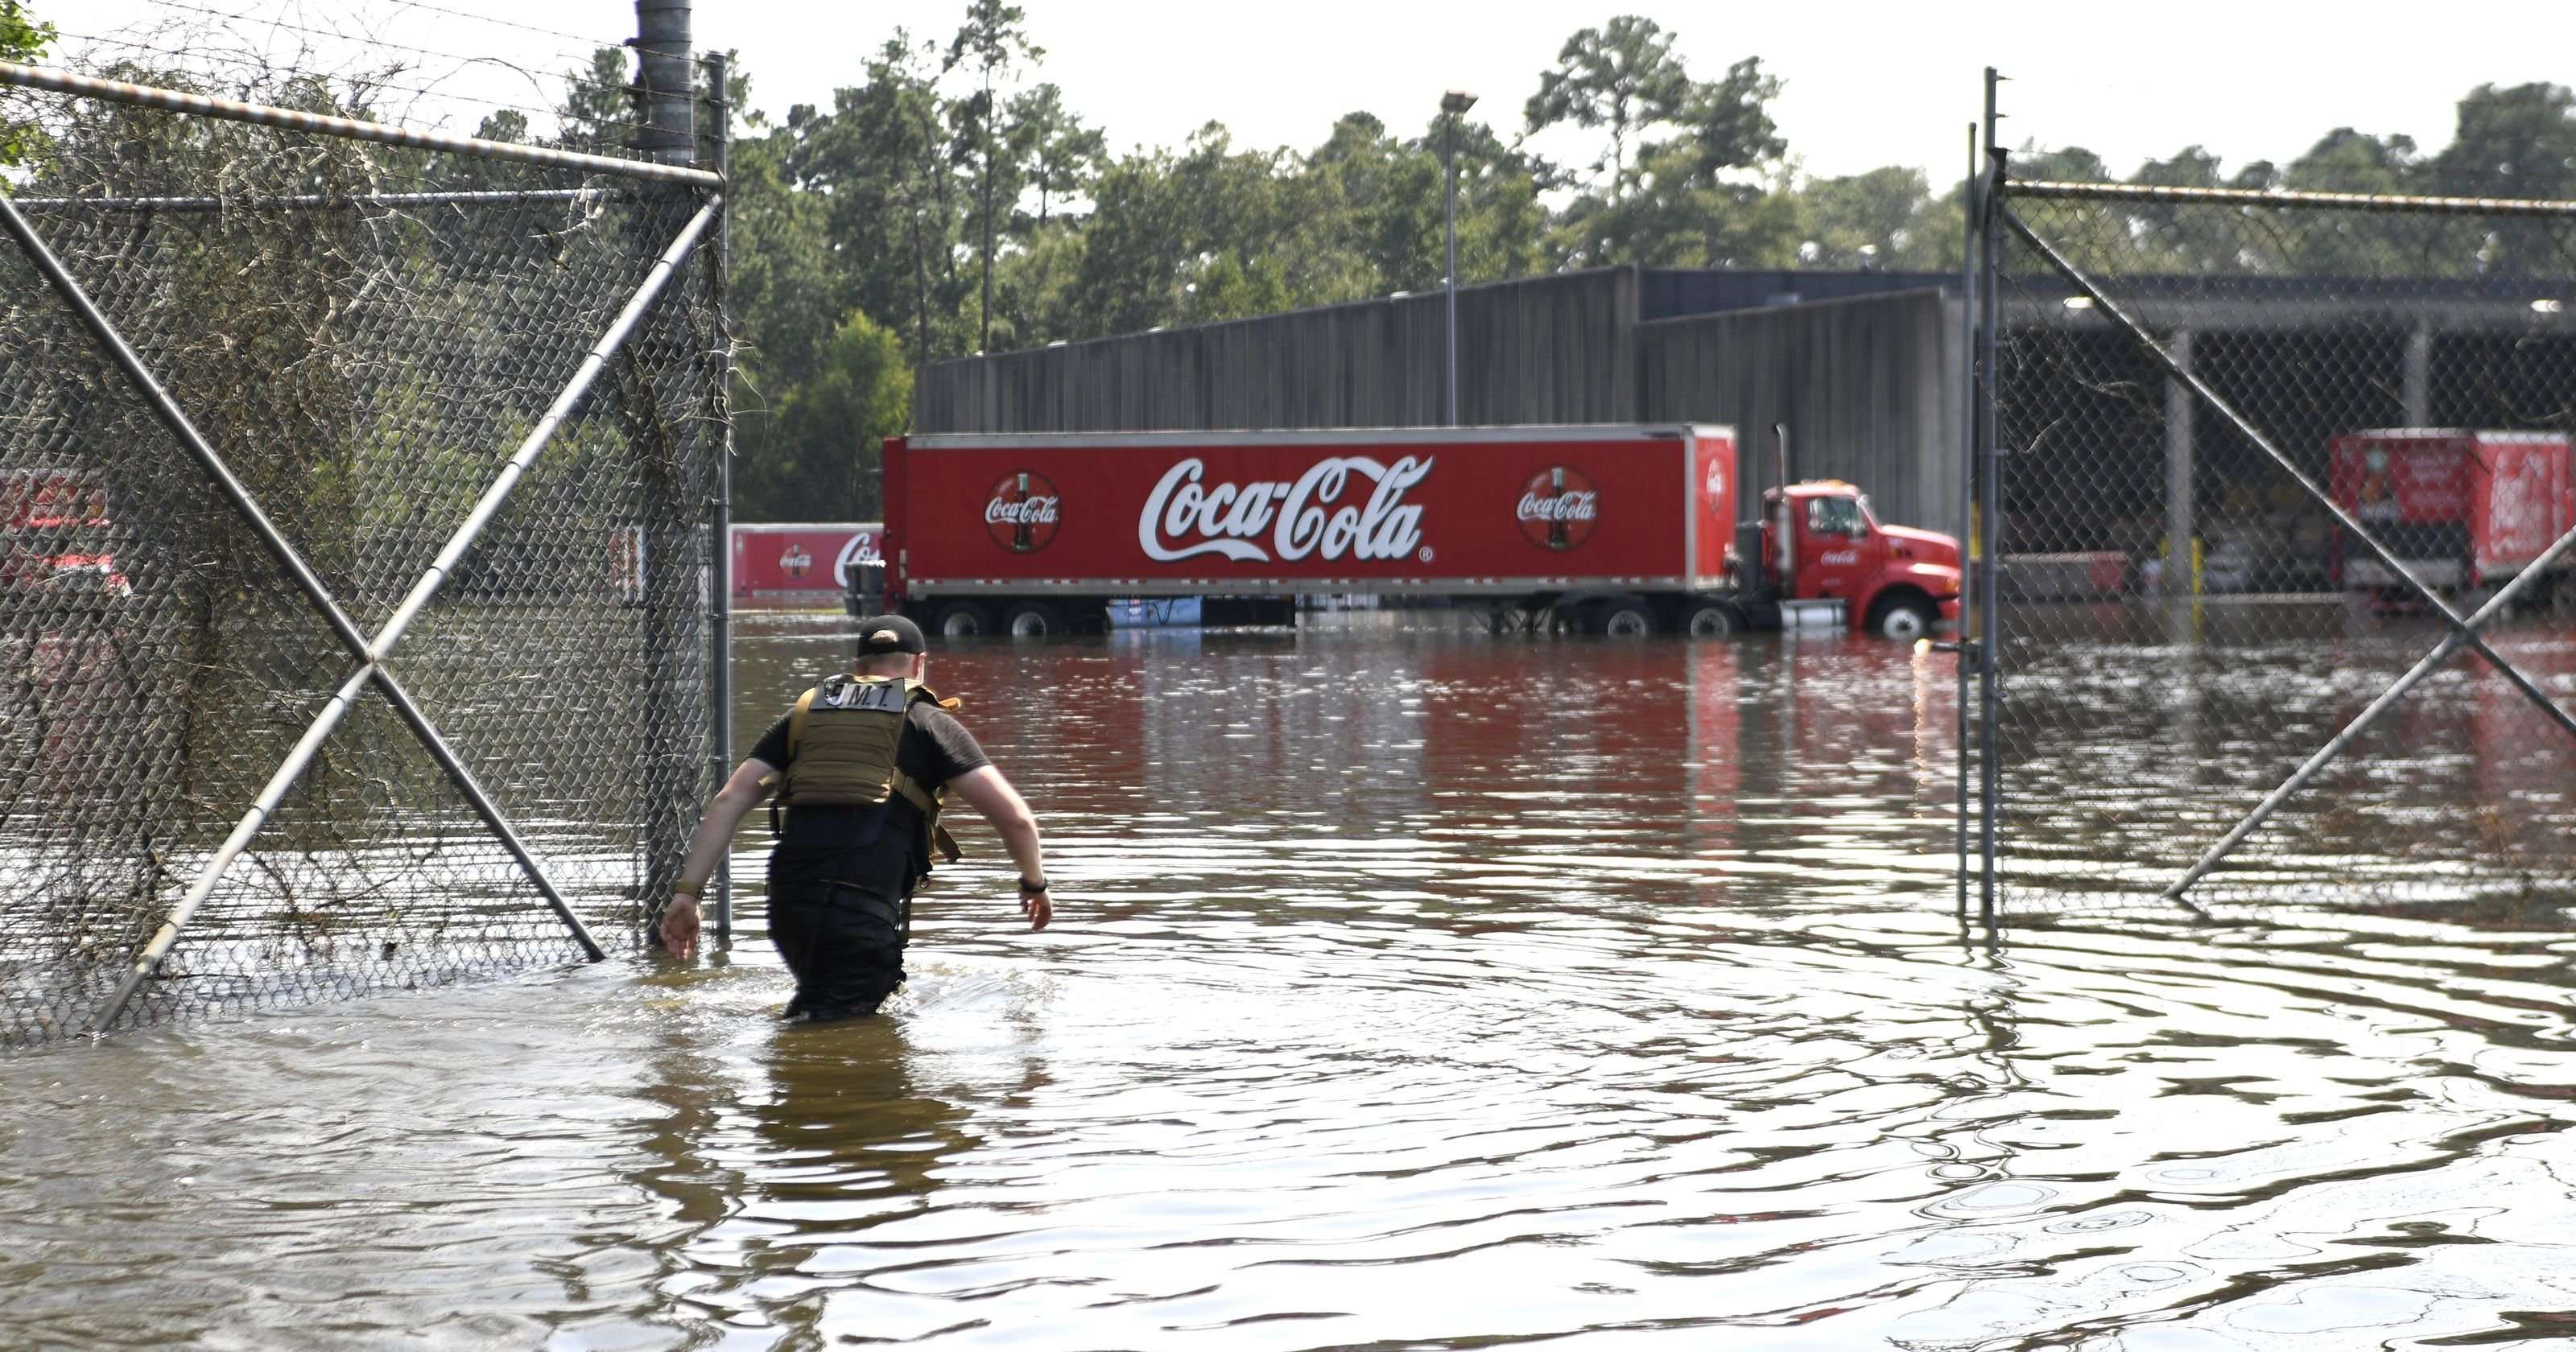 image for Beaumont, Texas: In a city with no water, two men get Coca-Cola's permission to steal it